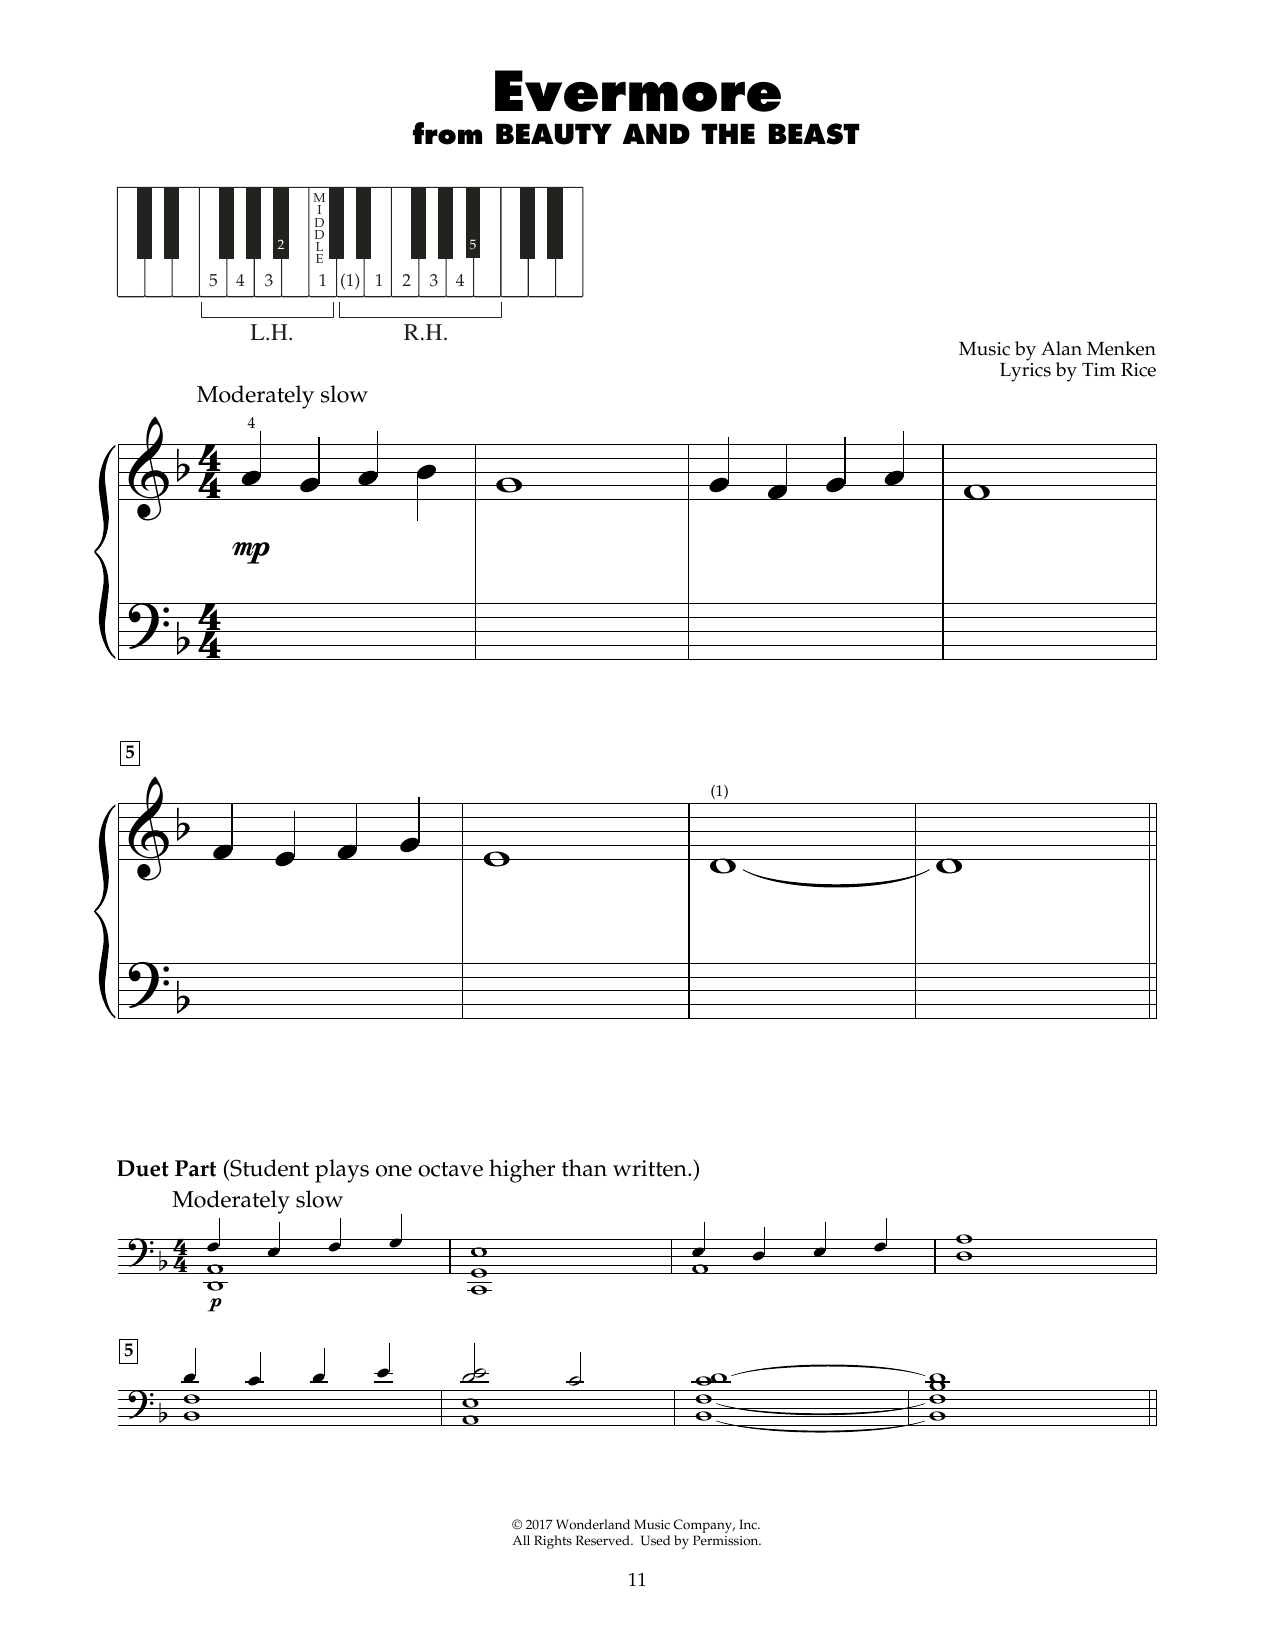 Download Josh Groban Evermore (from Beauty and the Beast) Sheet Music